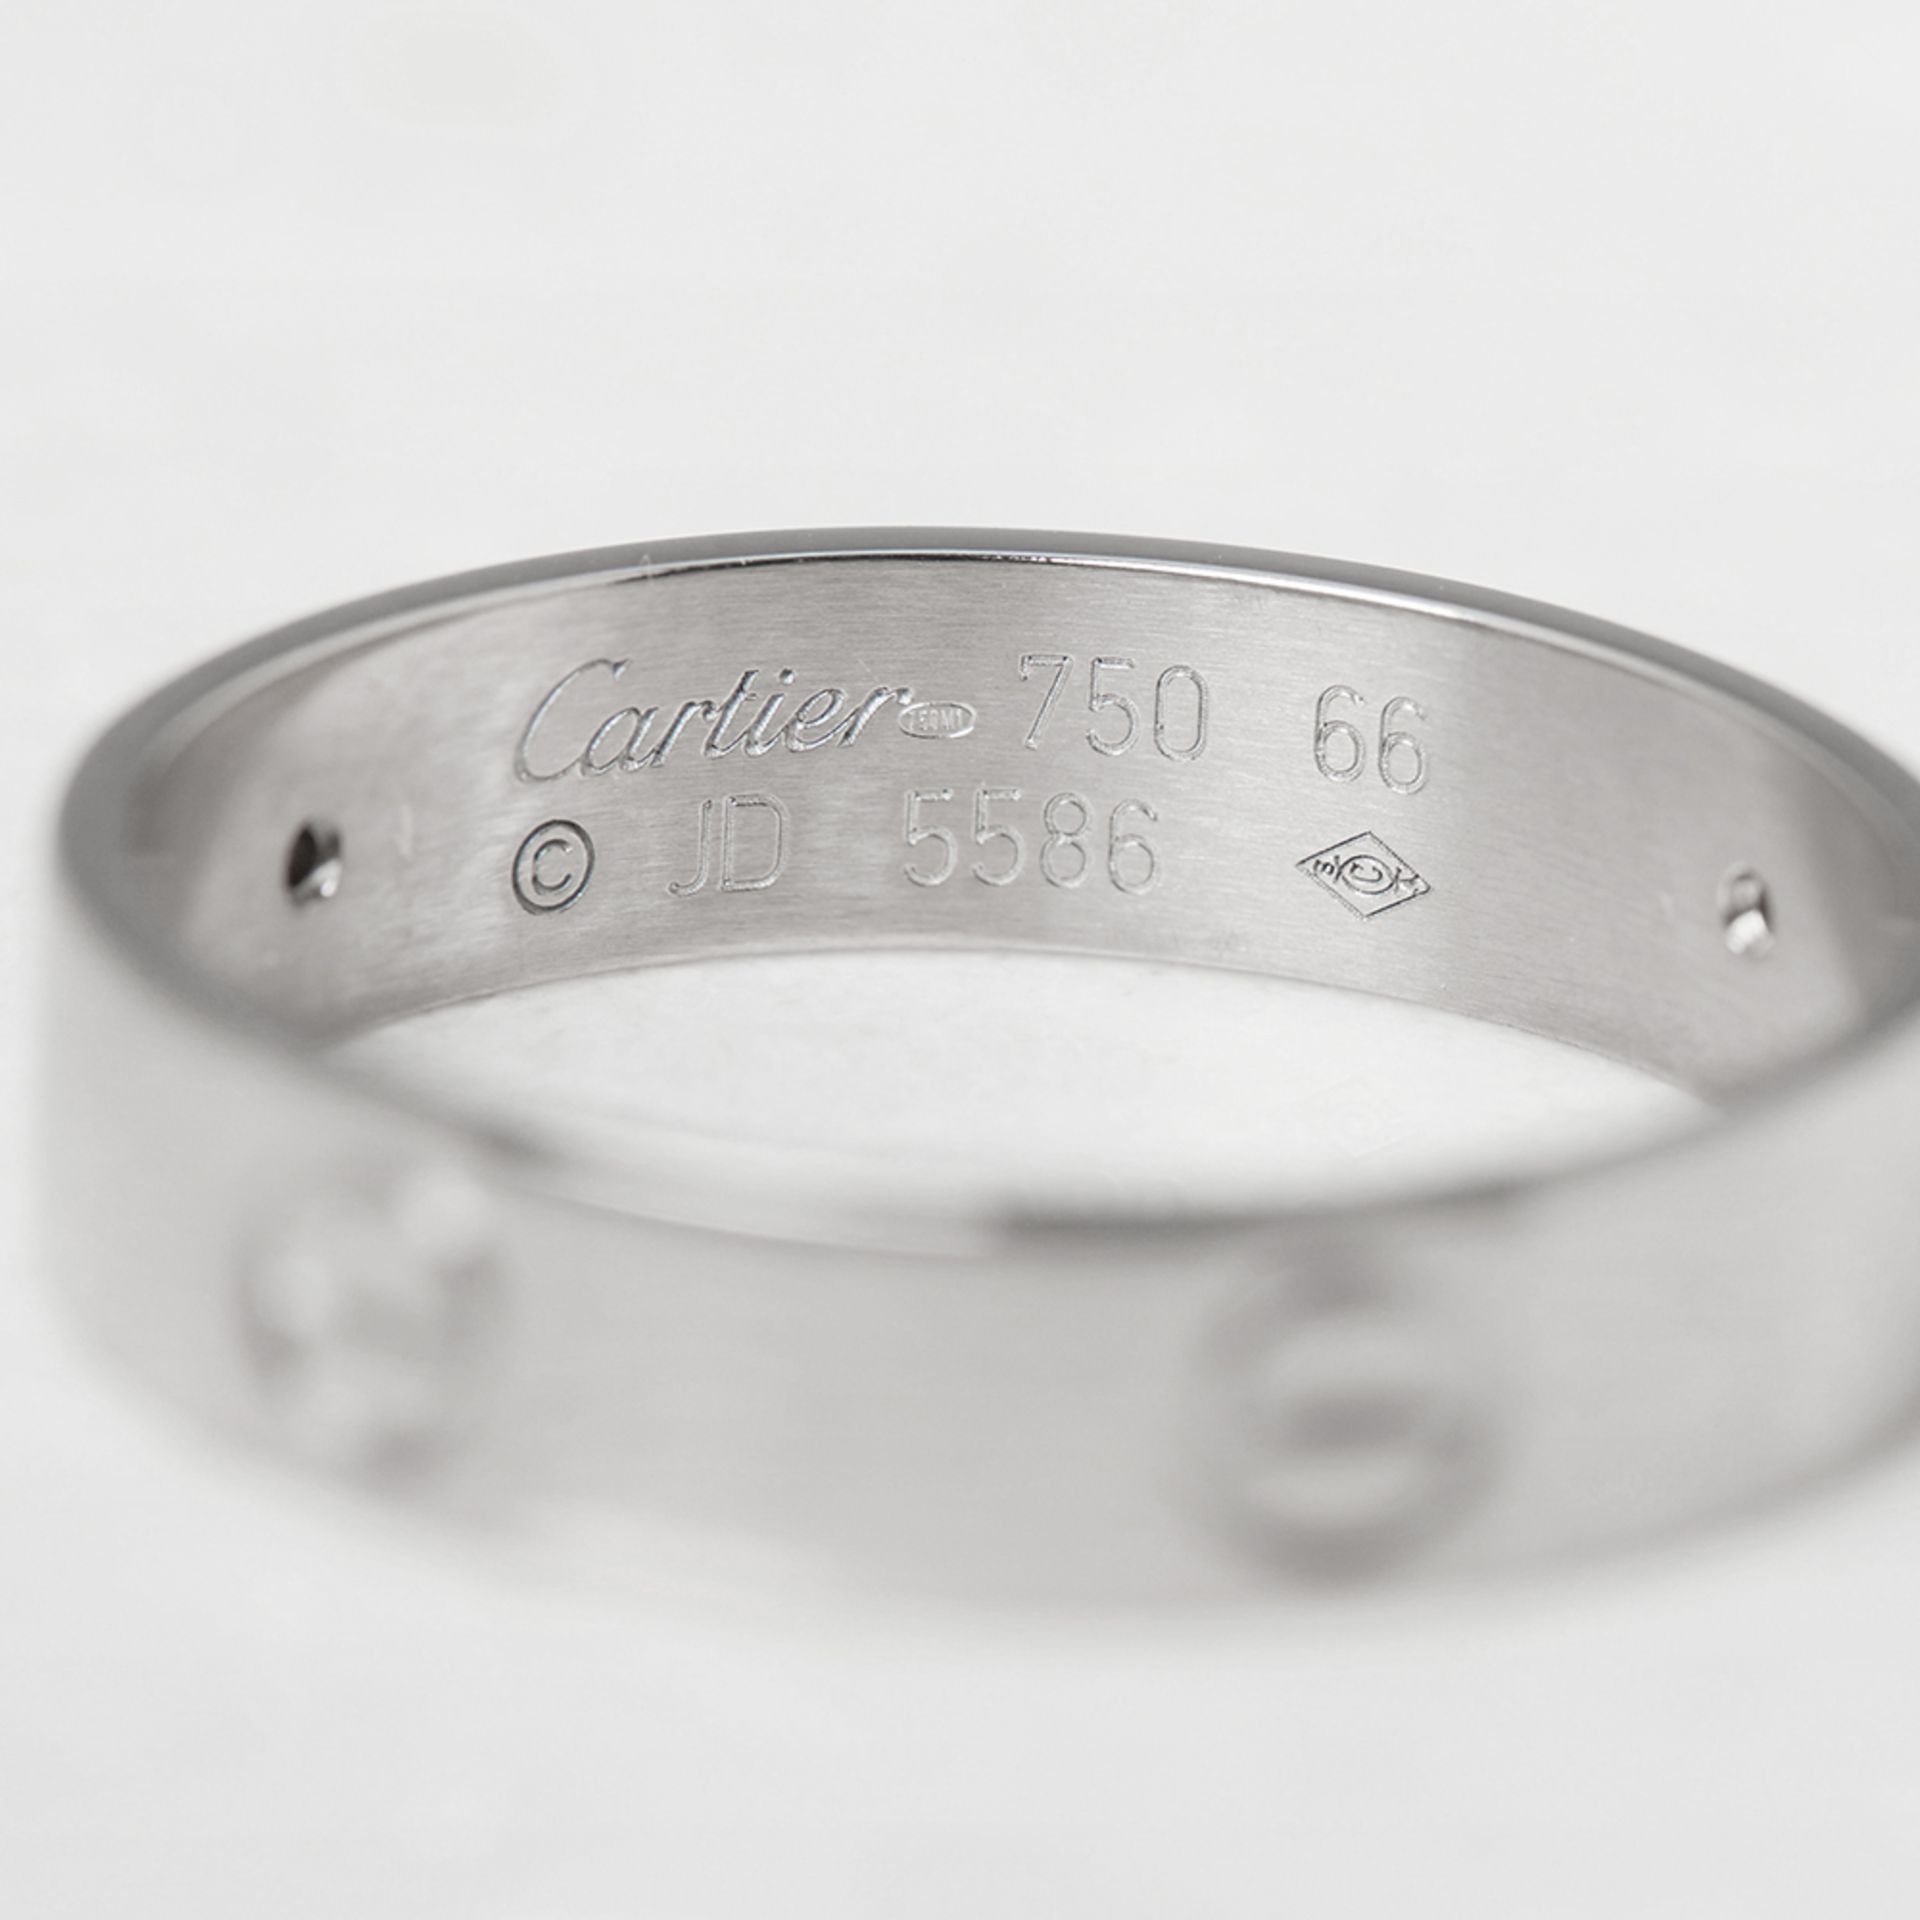 Cartier 18k White Gold Love Ring - Image 5 of 5